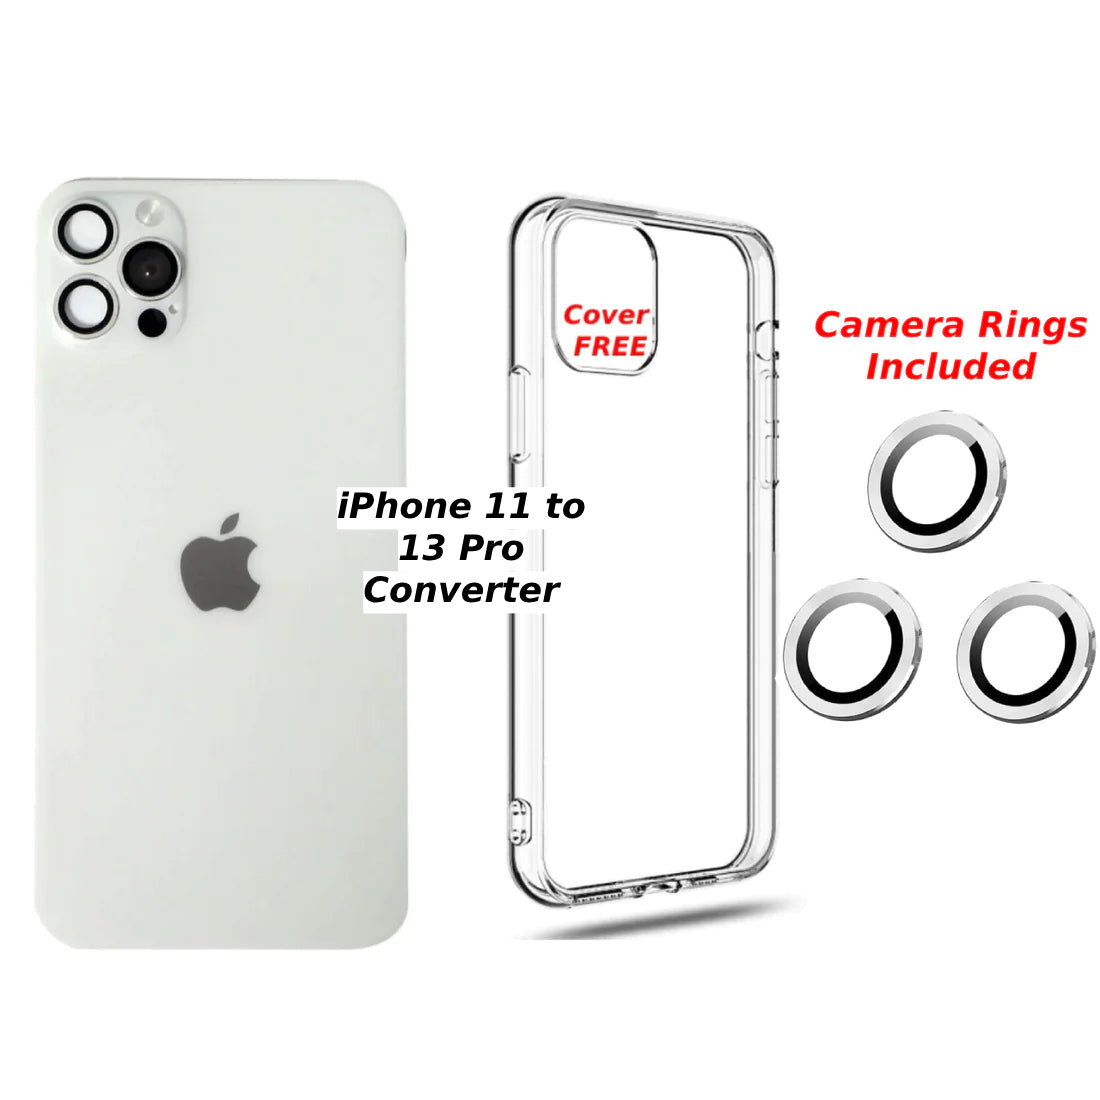 iPhone 11 to iPhone 13 Pro Converter - (Free Cover Included) and Camera Rings